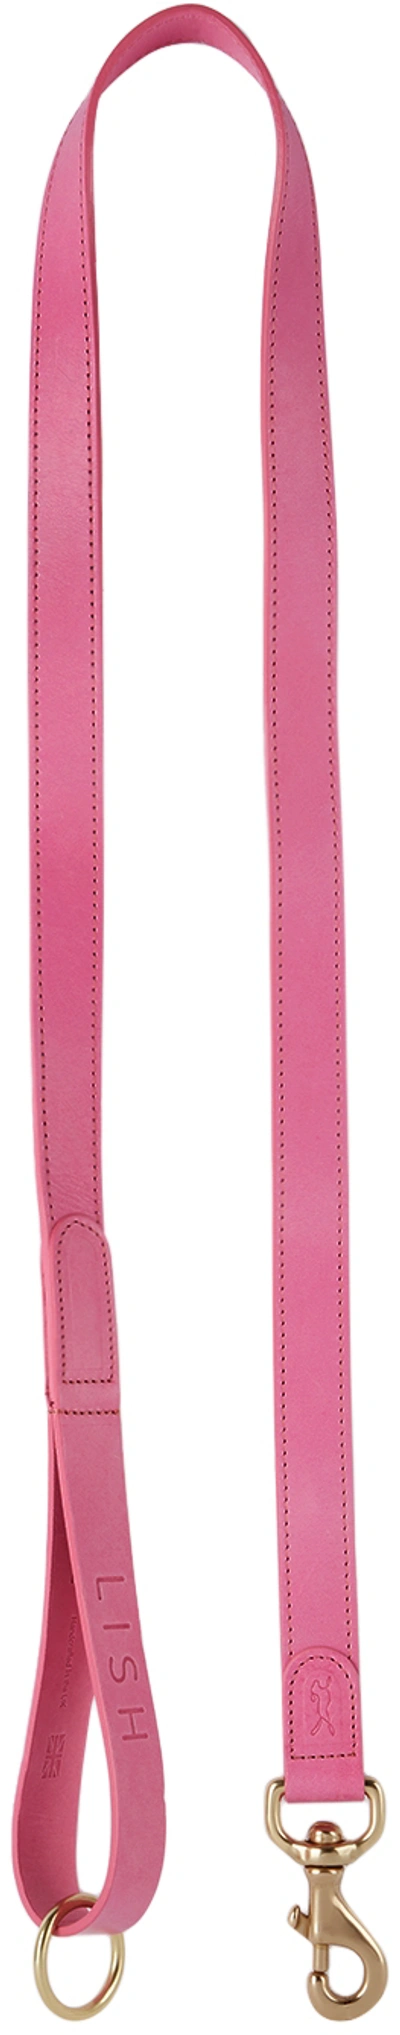 Lish Pink Large Coopers Leash